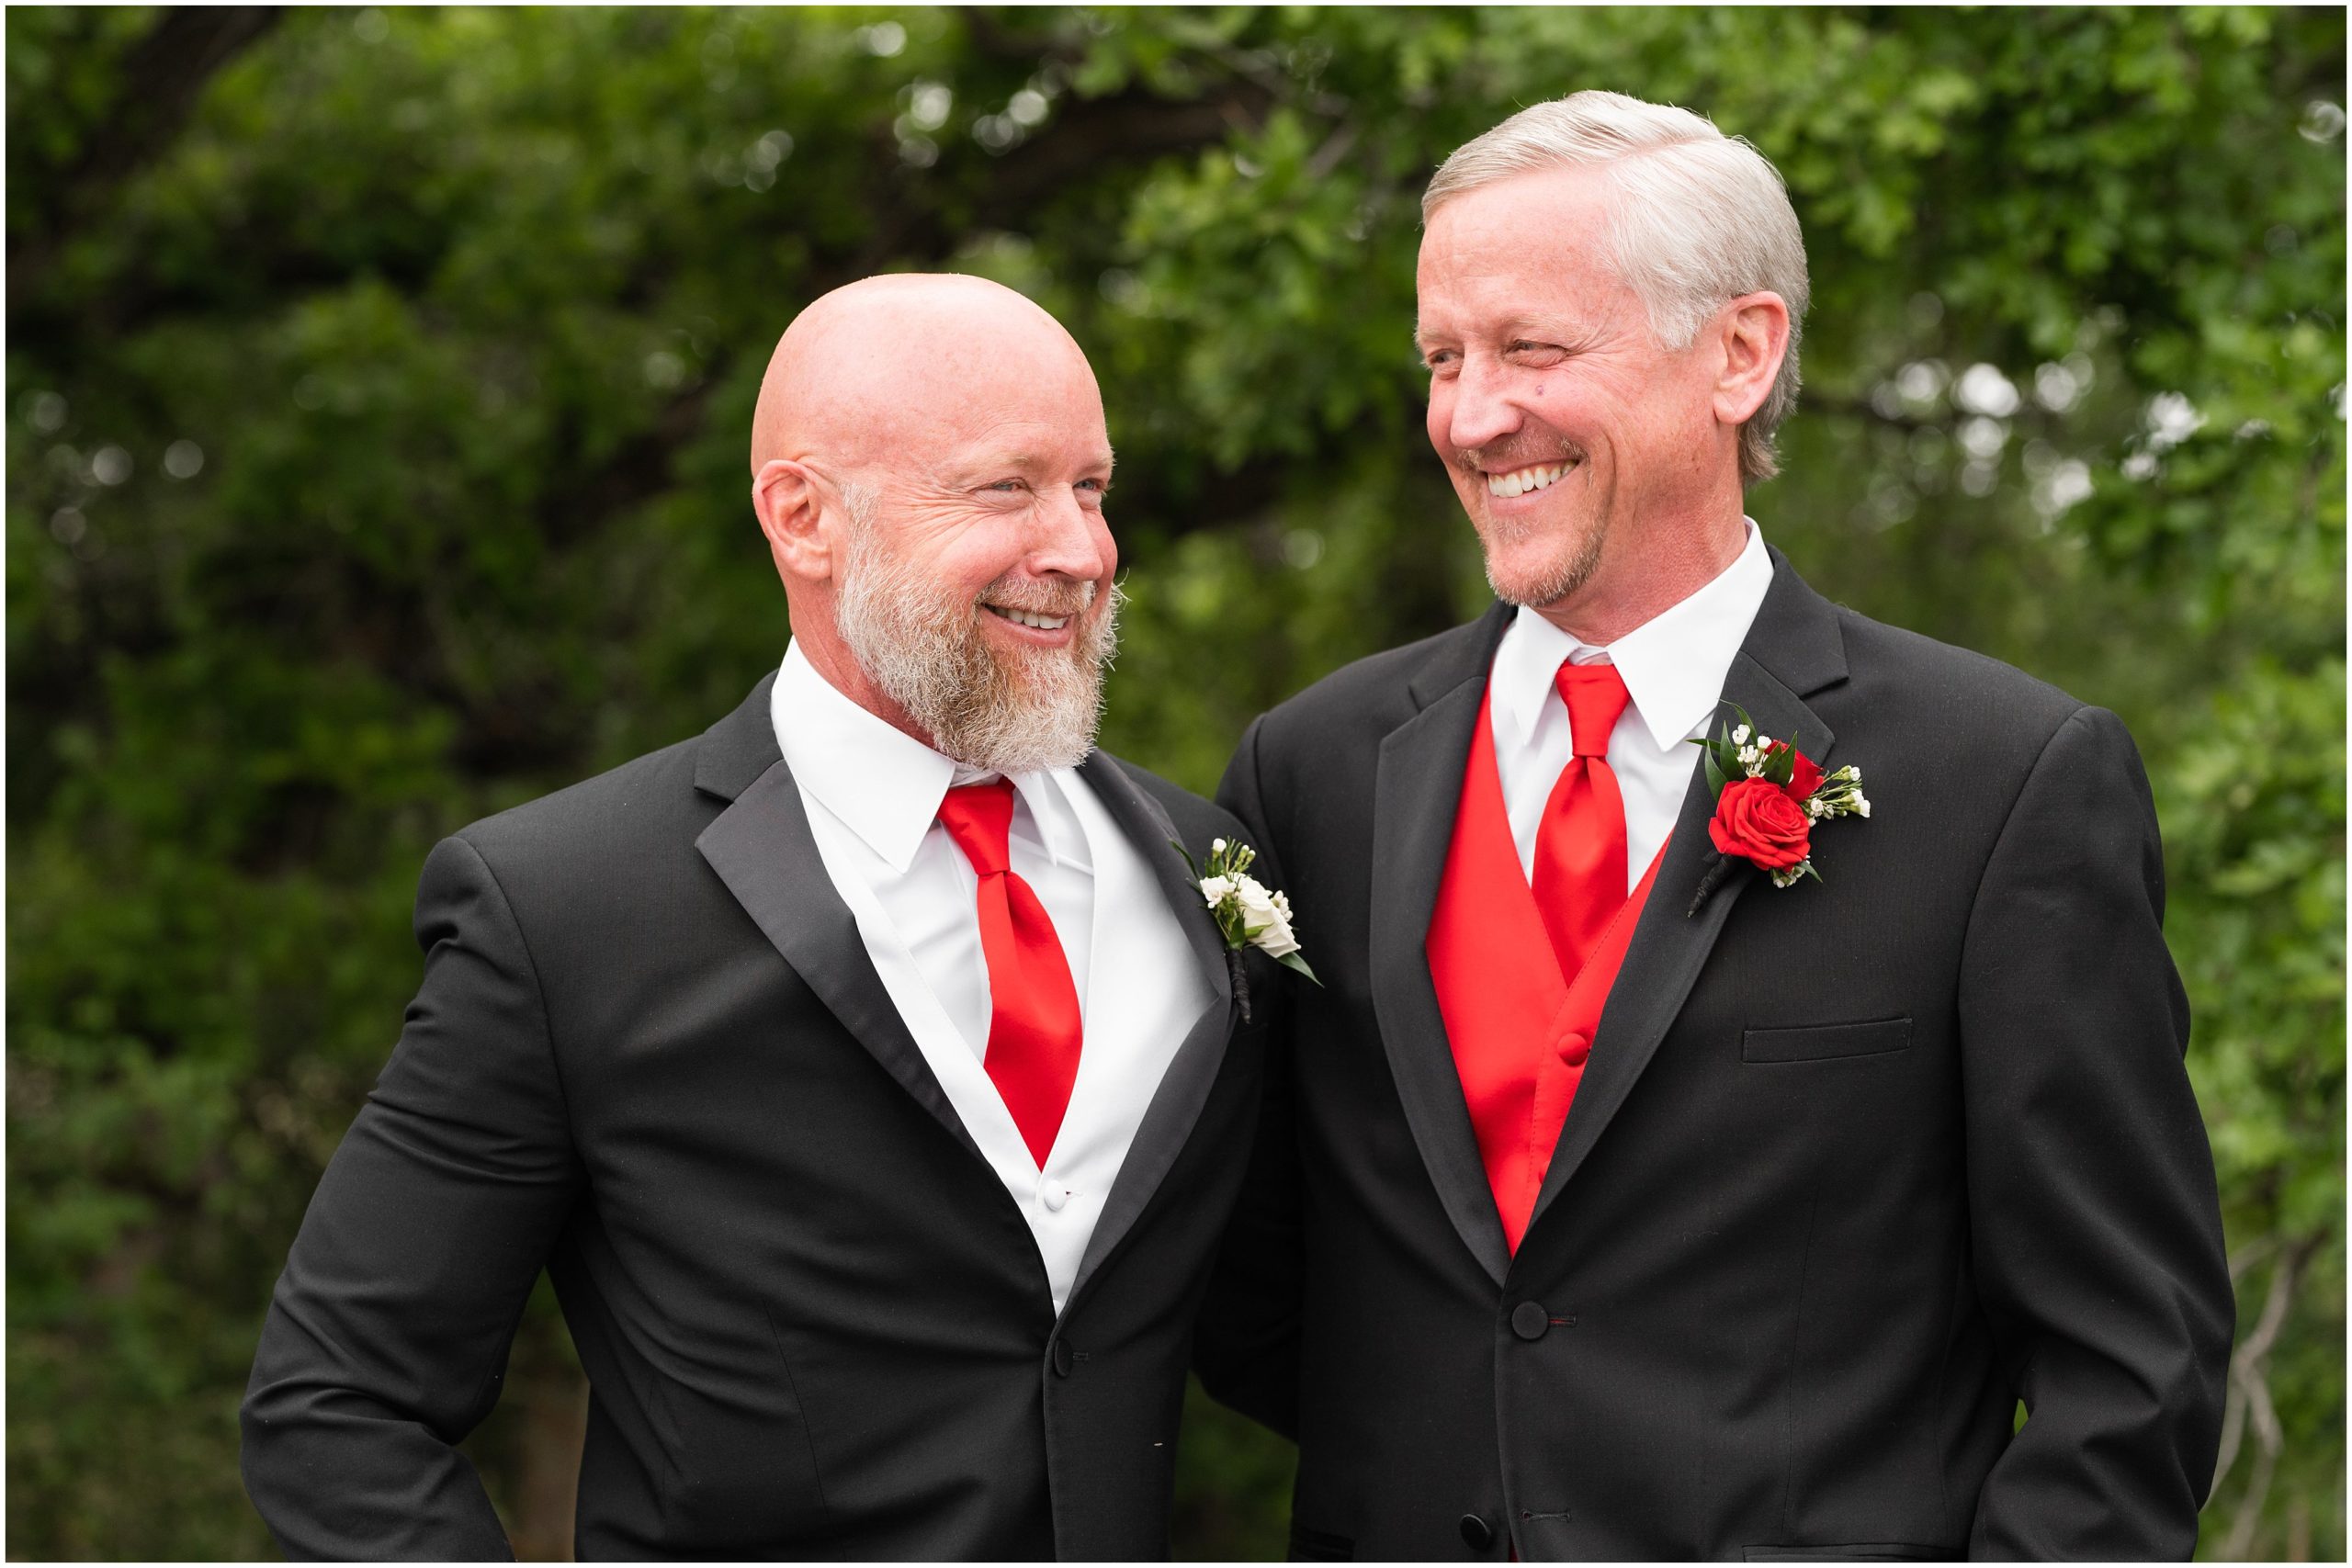 Groom and groomsmen photos with red tie and black suits and University of Utah socks | Red and Black Oak Hills Utah Spring Wedding | Jessie and Dallin Photography